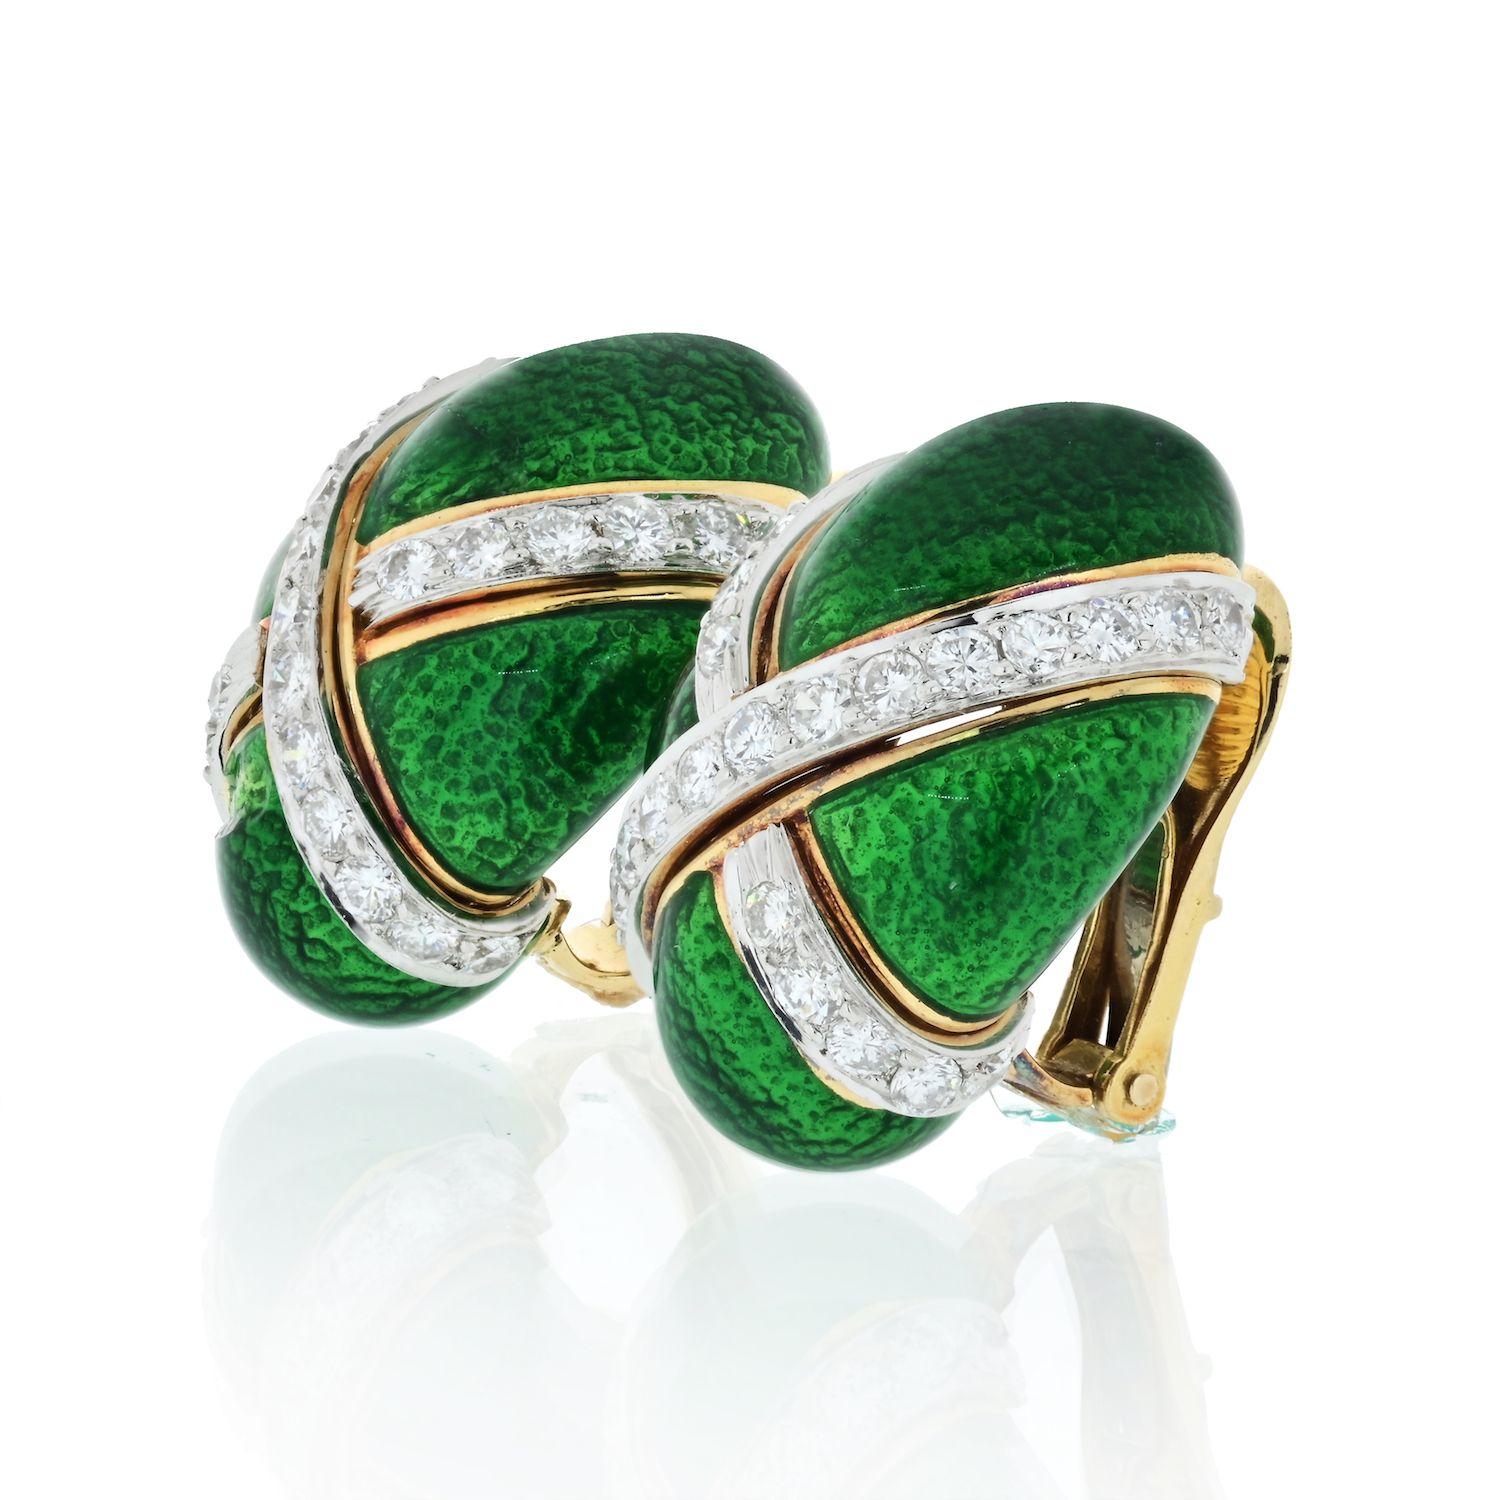 18 kt., the oval bombe earrings applied with green patterned enamel, divided by 52 platinum-set round diamonds approximately 2.10 cts., signed Webb, approximately 18.6 dwts.
